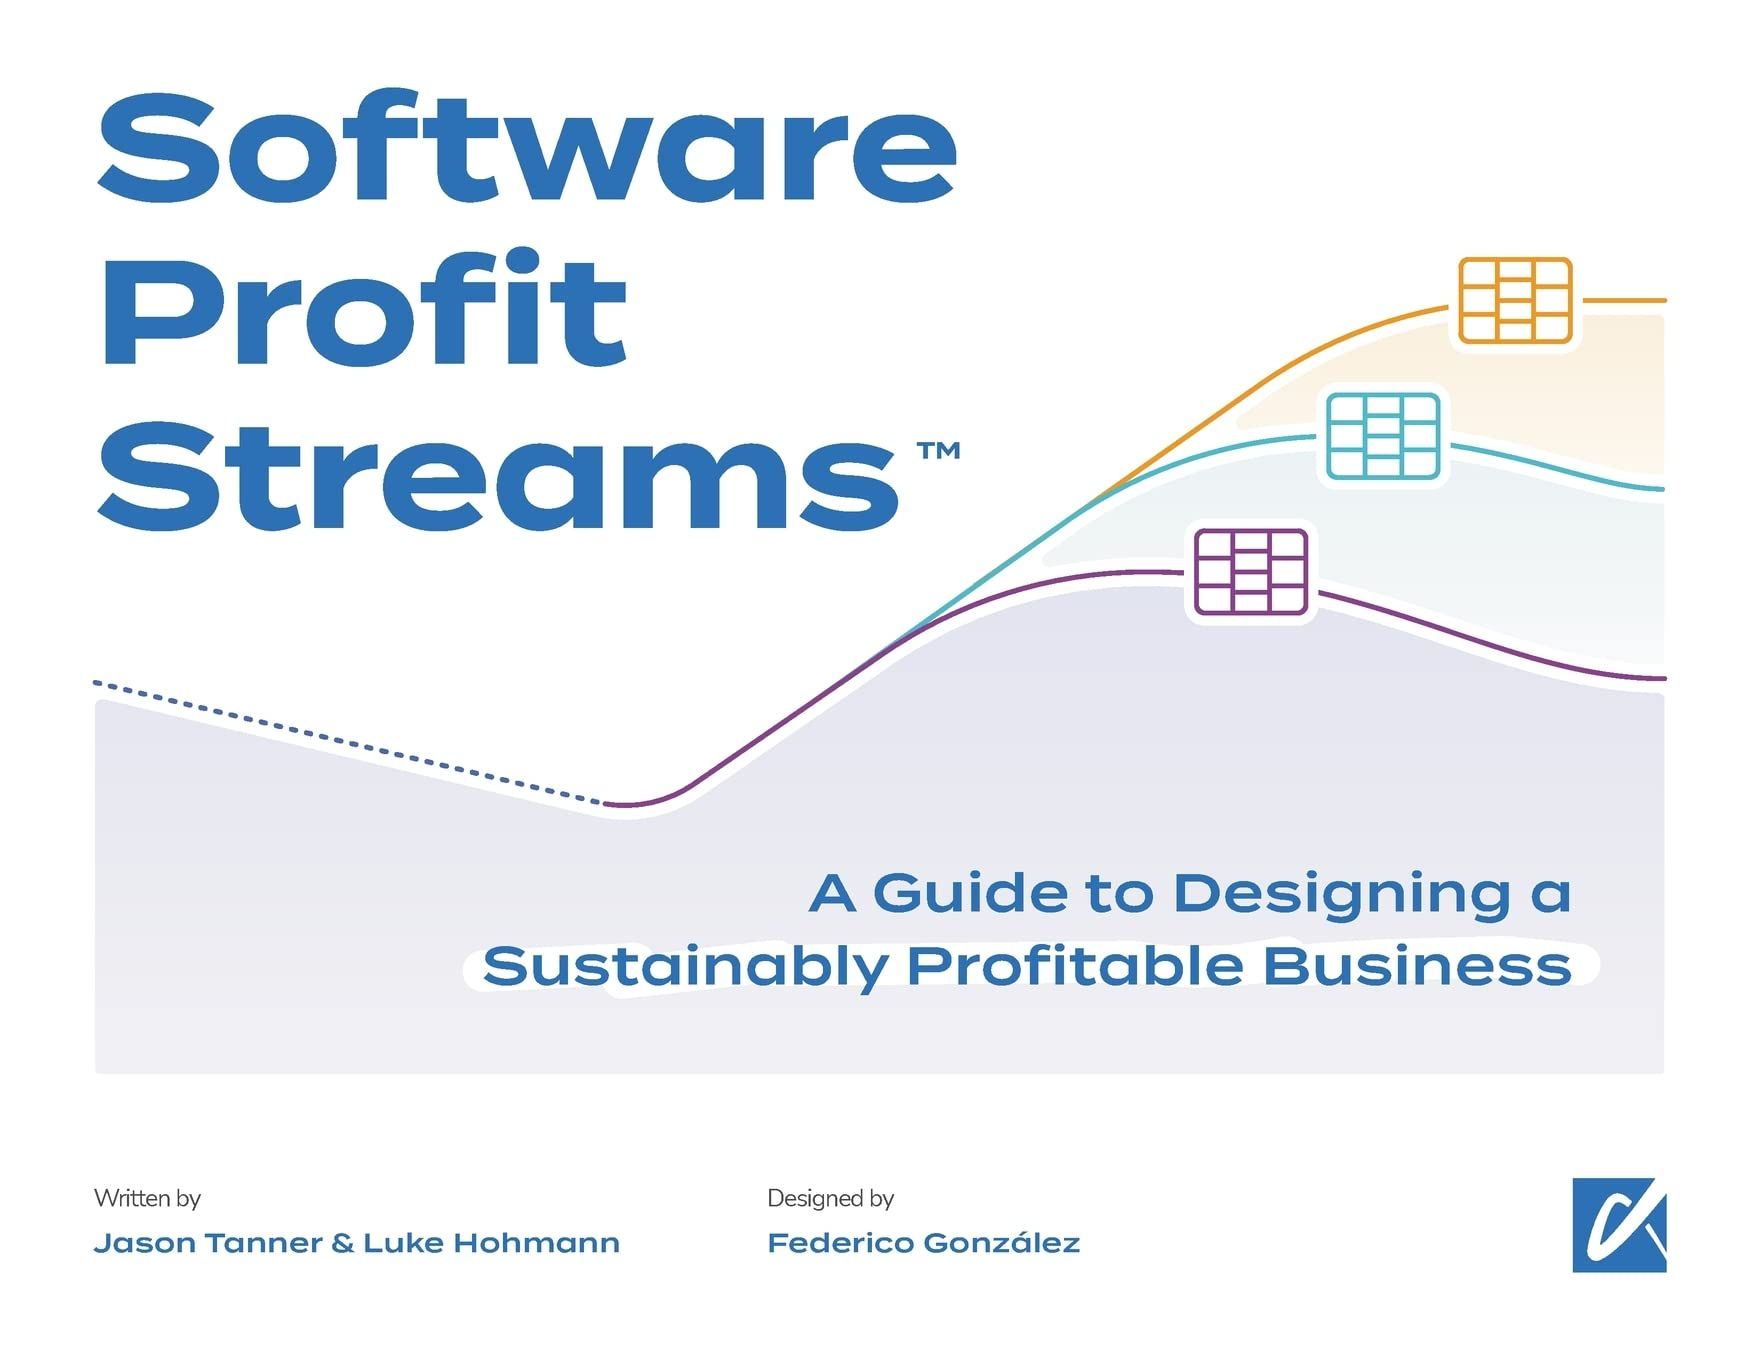 The cover of the book, Software Profit Streams, by Luke Hohmann and Jason Tanner